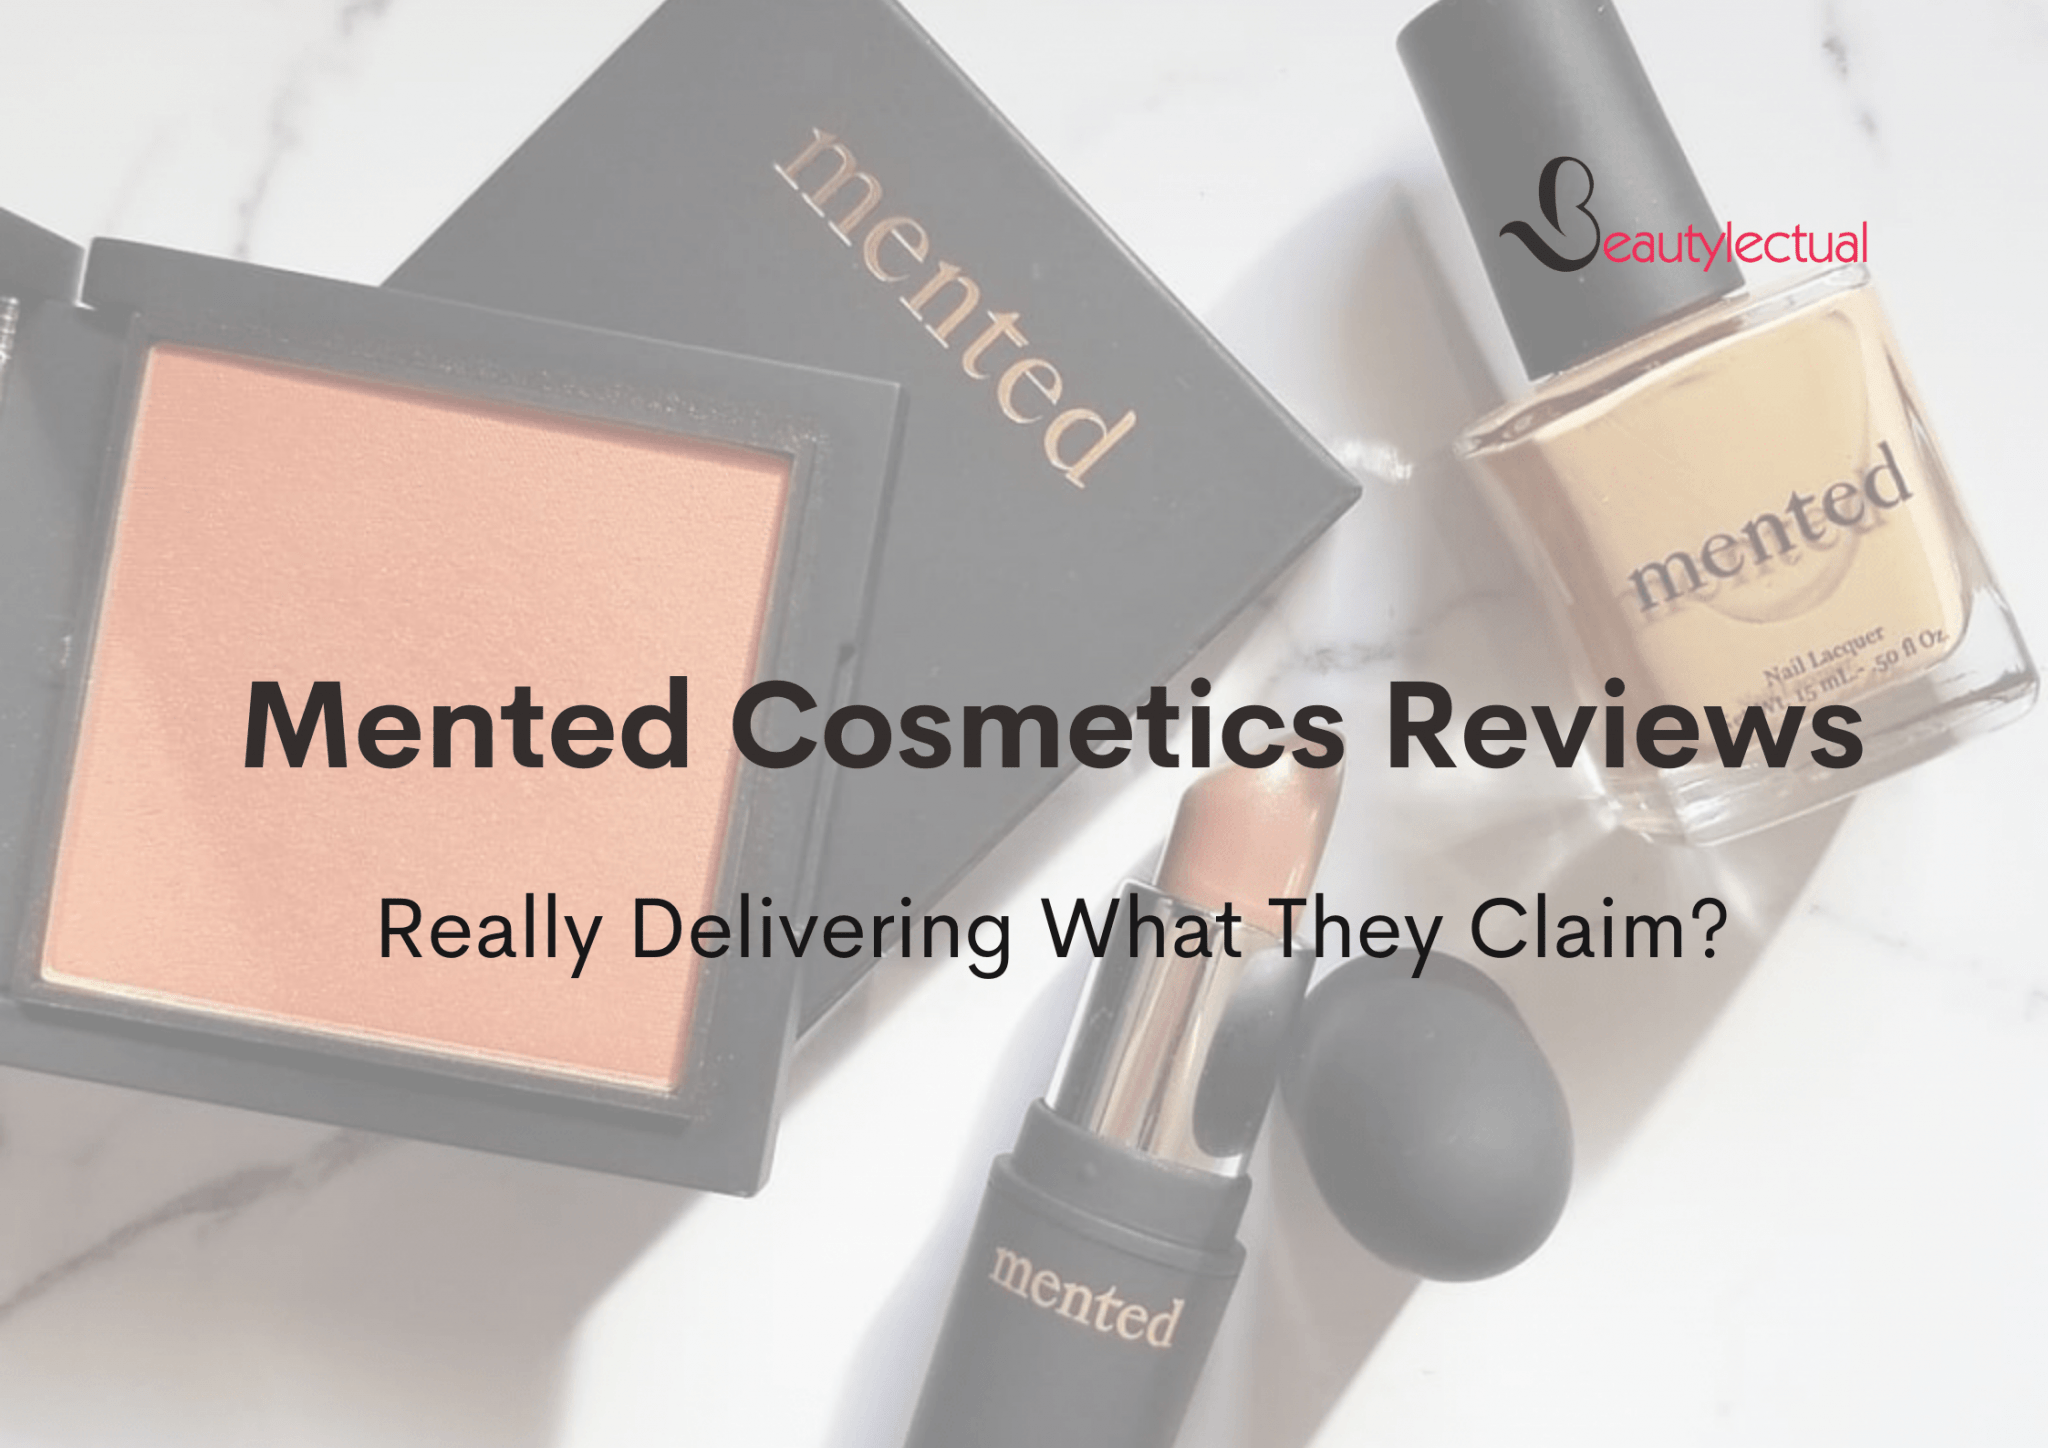 Mented Cosmetics Reviews Makeup For All Skin Tones Beautylectual 